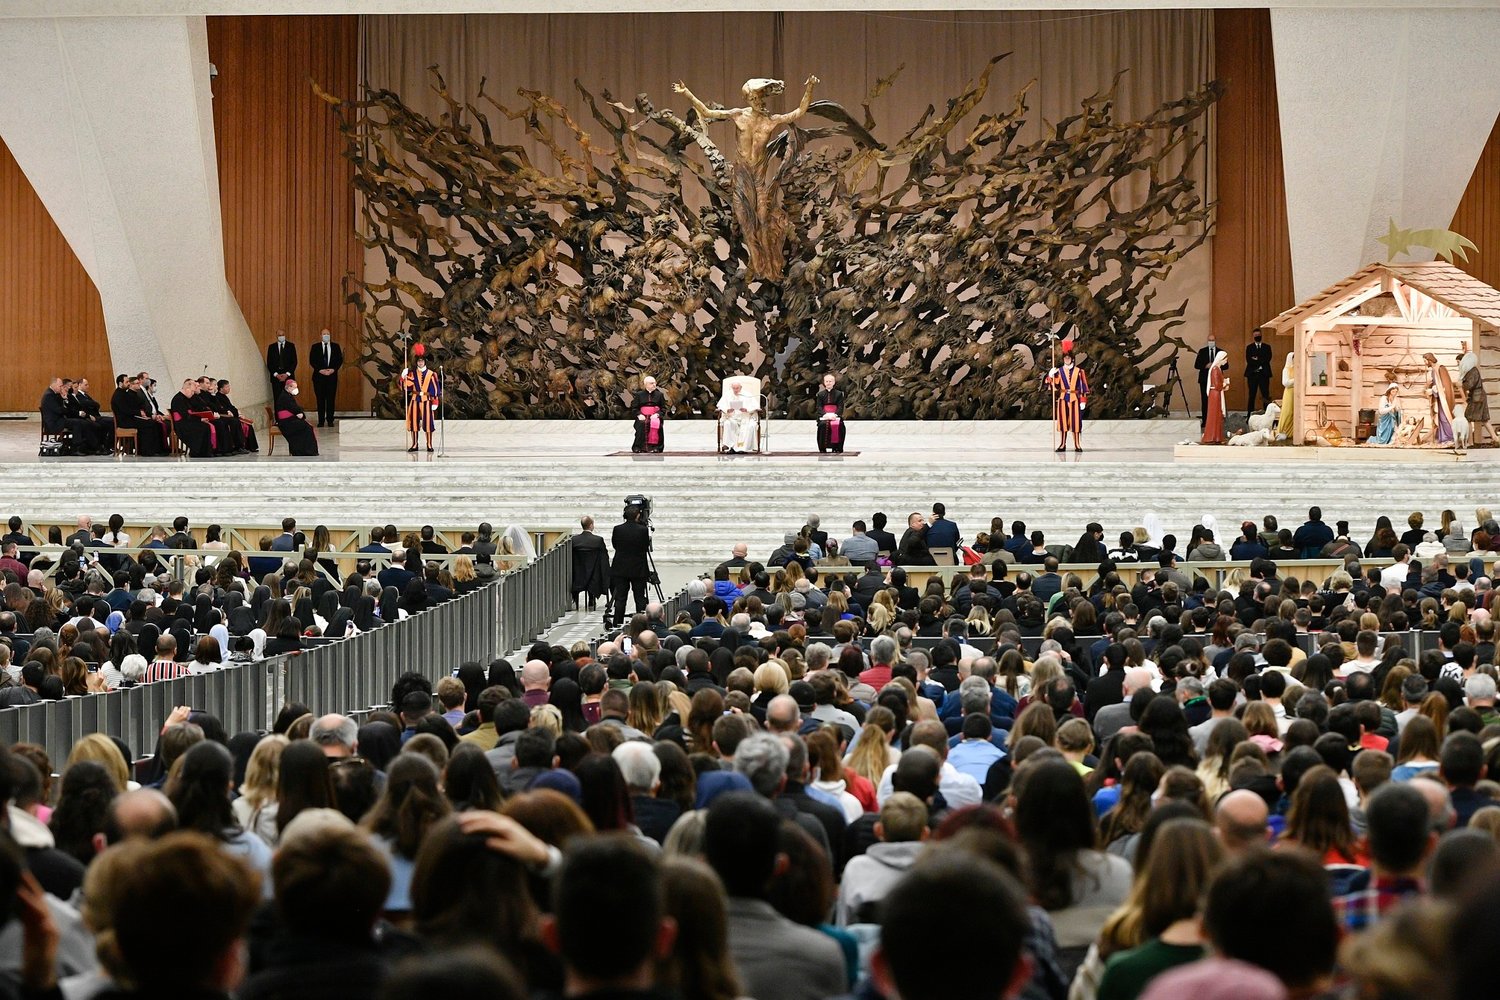 Pope Francis leads his weekly general audience in the Vatican’s Paul VI hall Dec. 29.